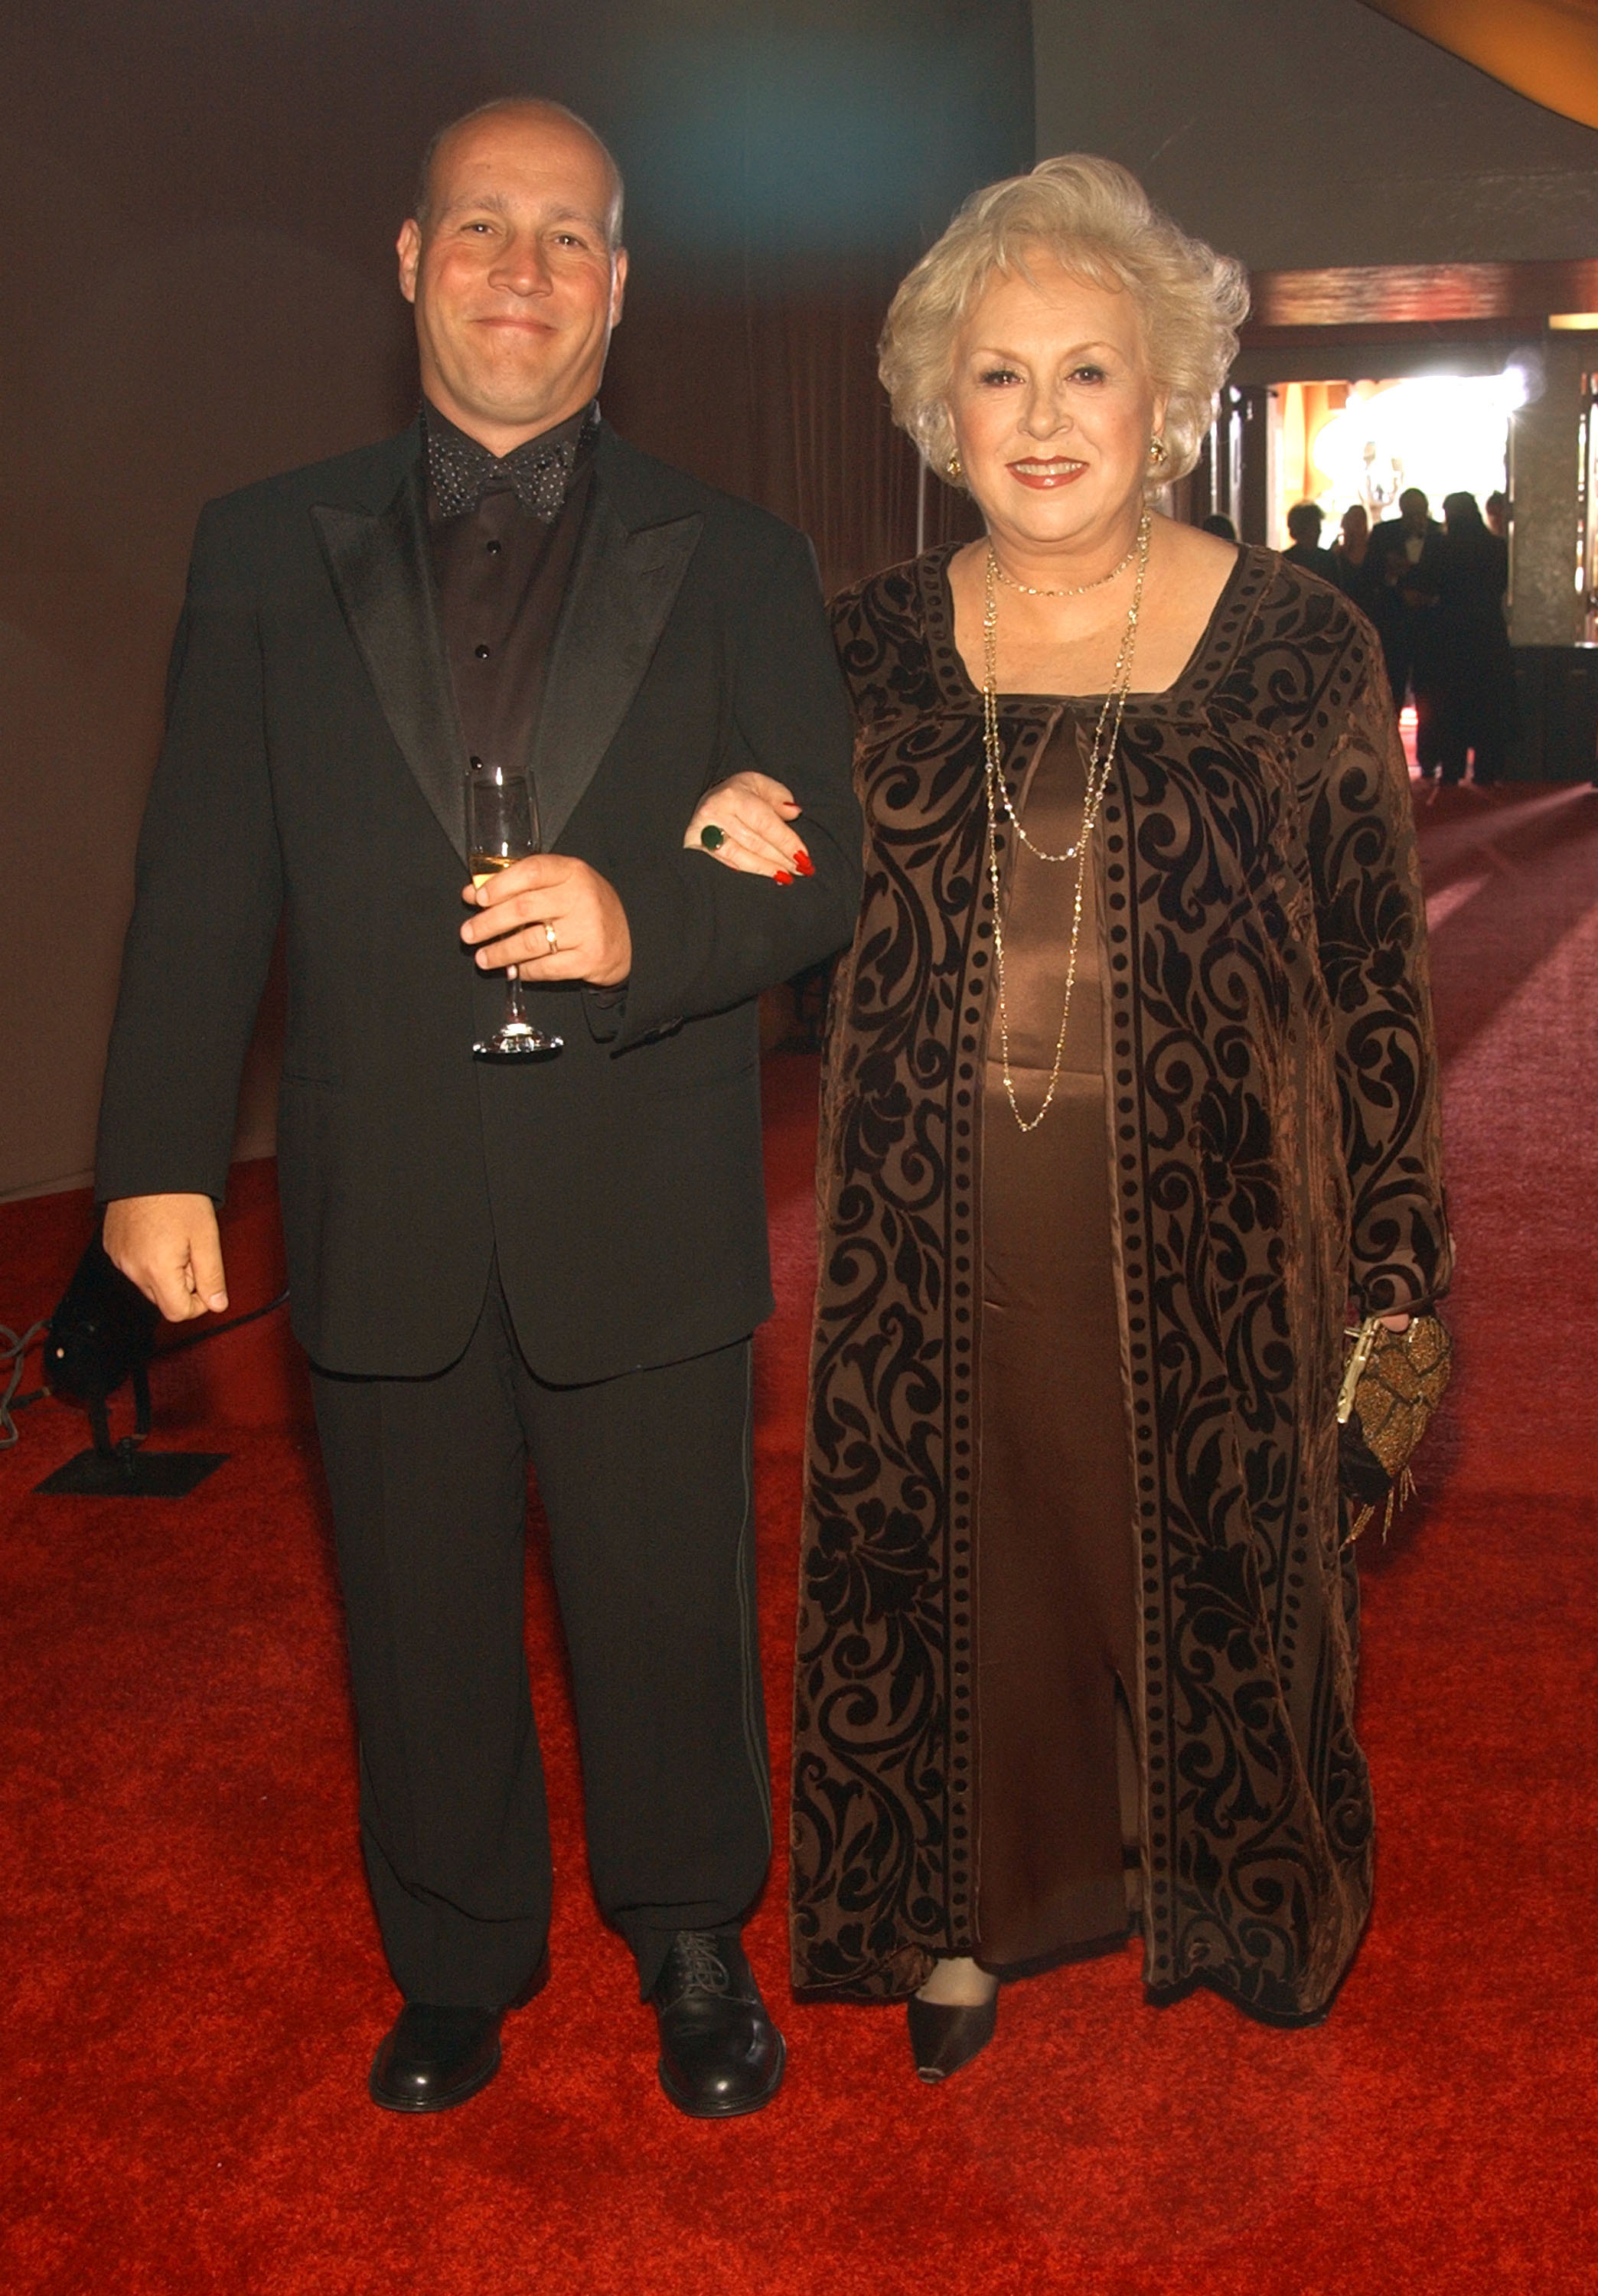 Michael Cannata and Doris Roberts during the 9th Annual Screen Actors Guild Awards in Los Angeles, California, on March 9, 2003 | Source: Getty Images